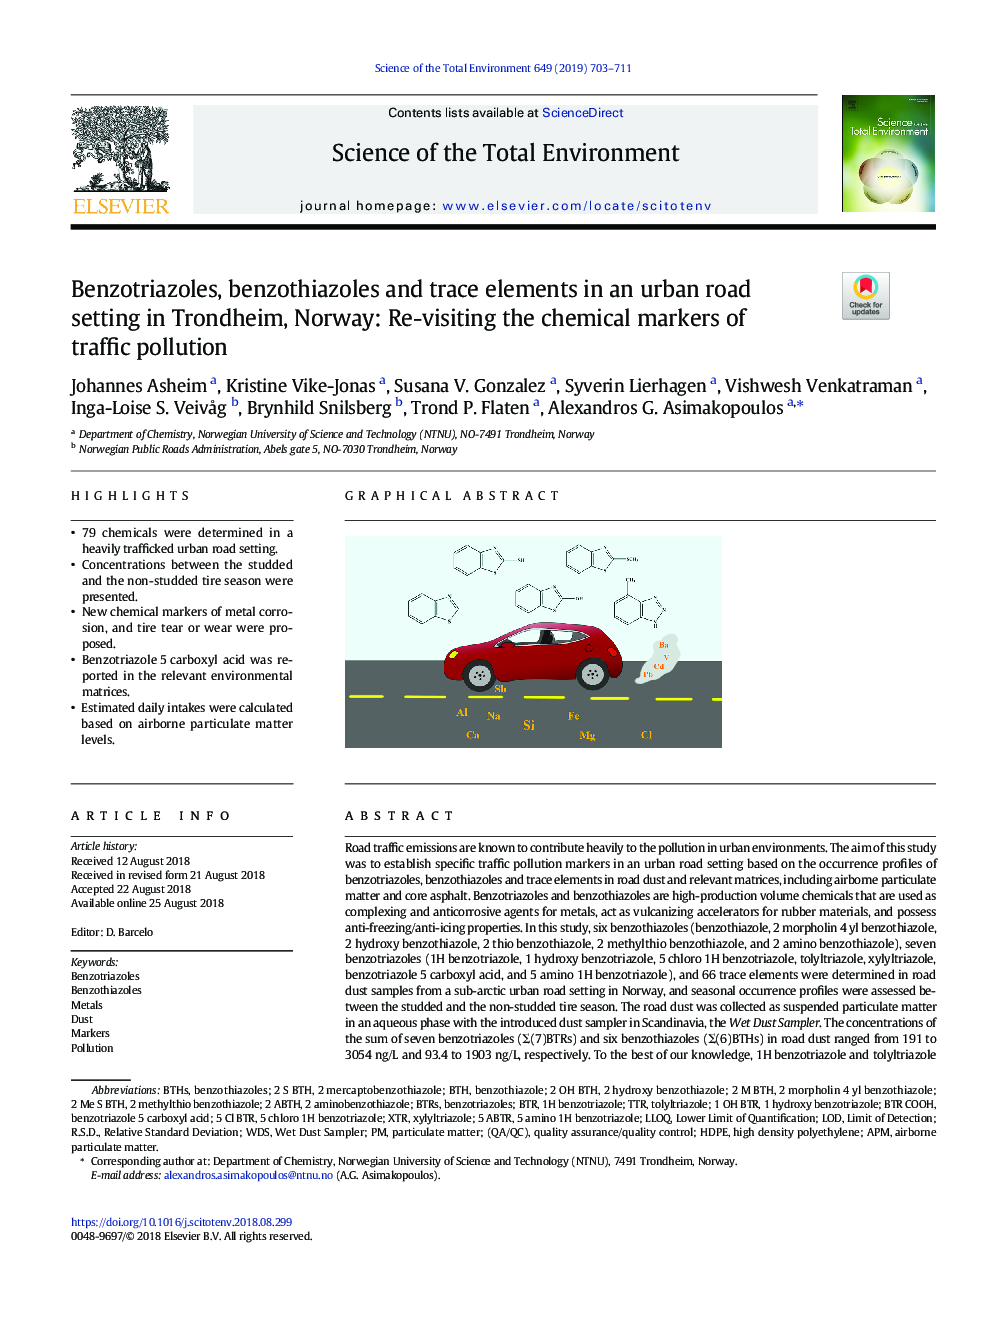 Benzotriazoles, benzothiazoles and trace elements in an urban road setting in Trondheim, Norway: Re-visiting the chemical markers of traffic pollution